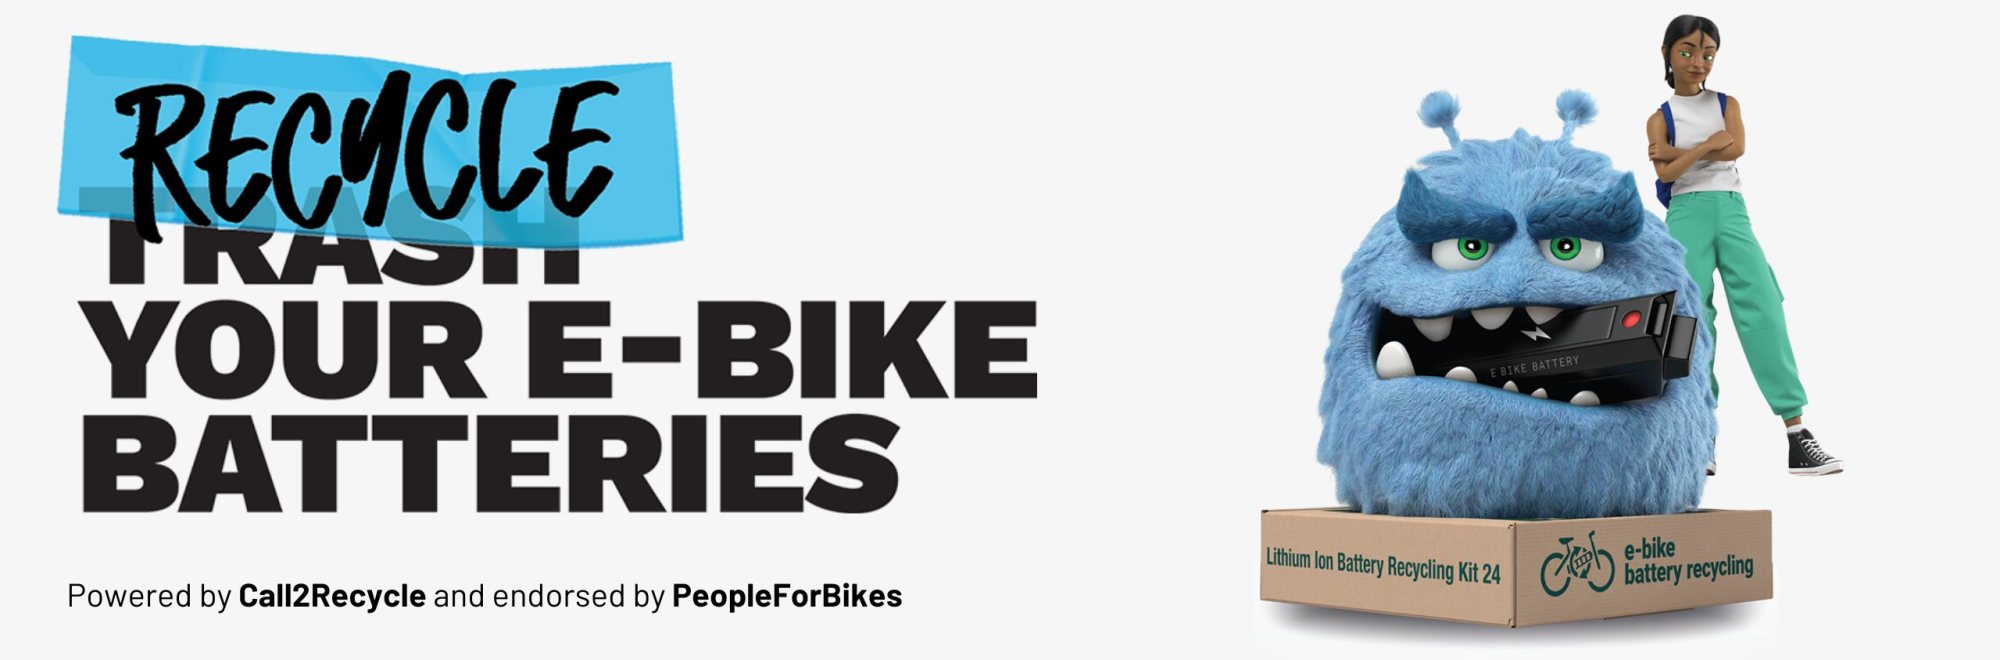 Recycle your E-Bike Batteries - Powered by Call2Recycle and endorsed by PeopleForBikes